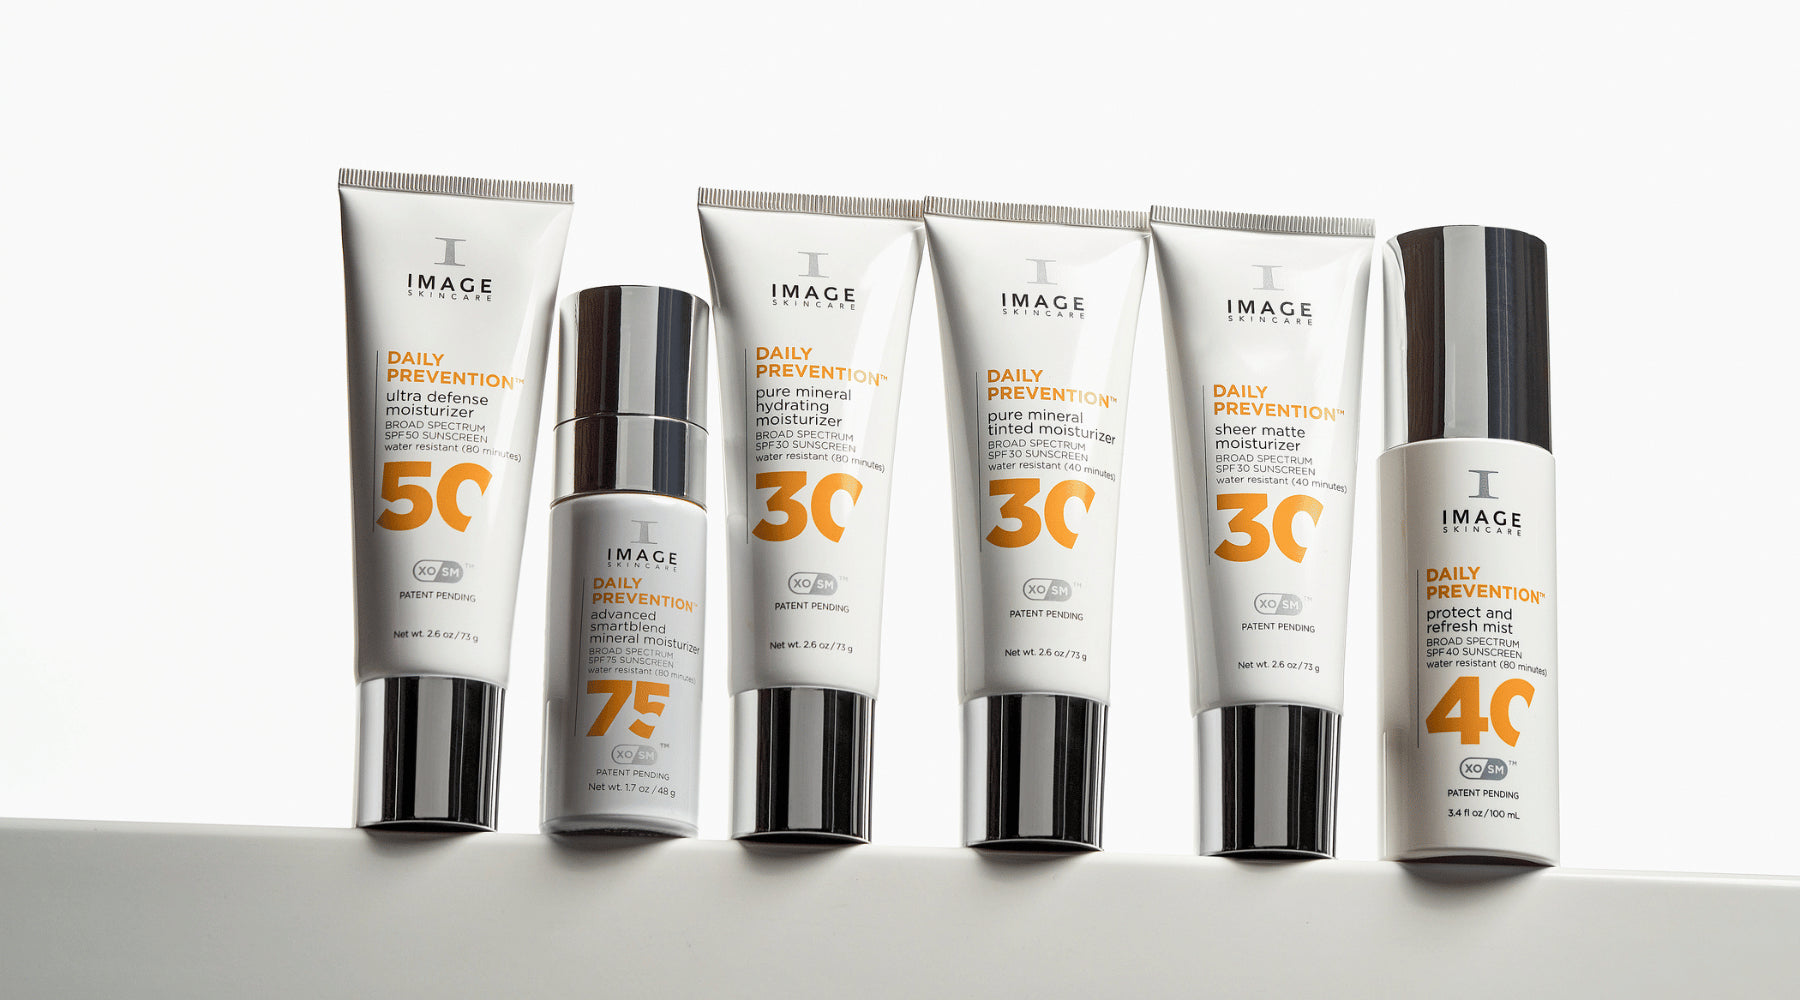 How to Choose the Best Sunscreen for Your Face